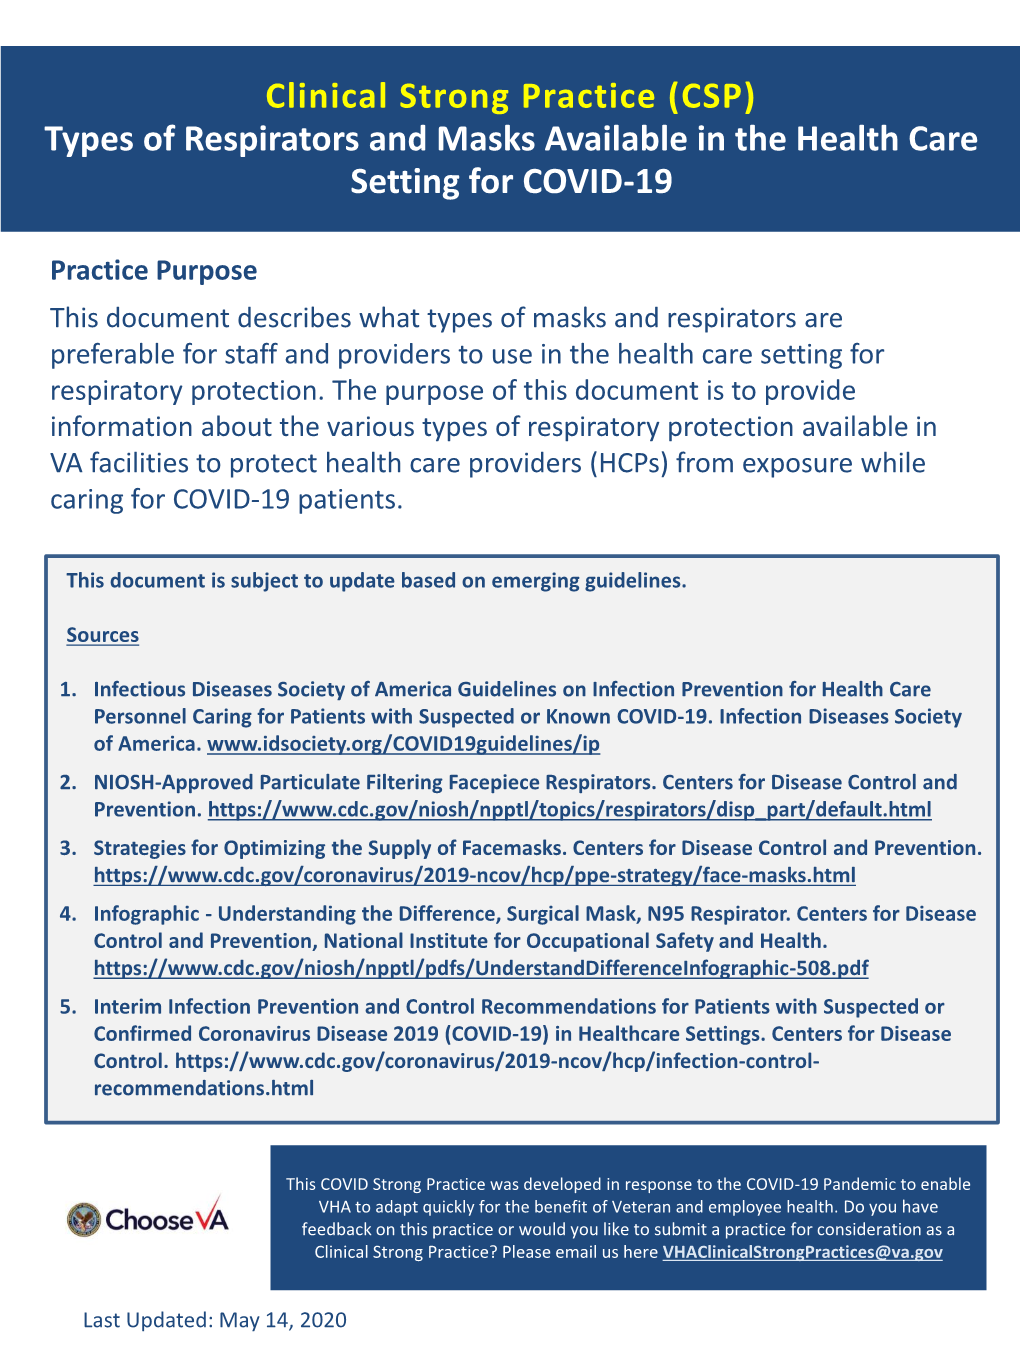 Clinical Strong Practice (CSP) Types of Respirators and Masks Available in the Health Care Setting for COVID-19